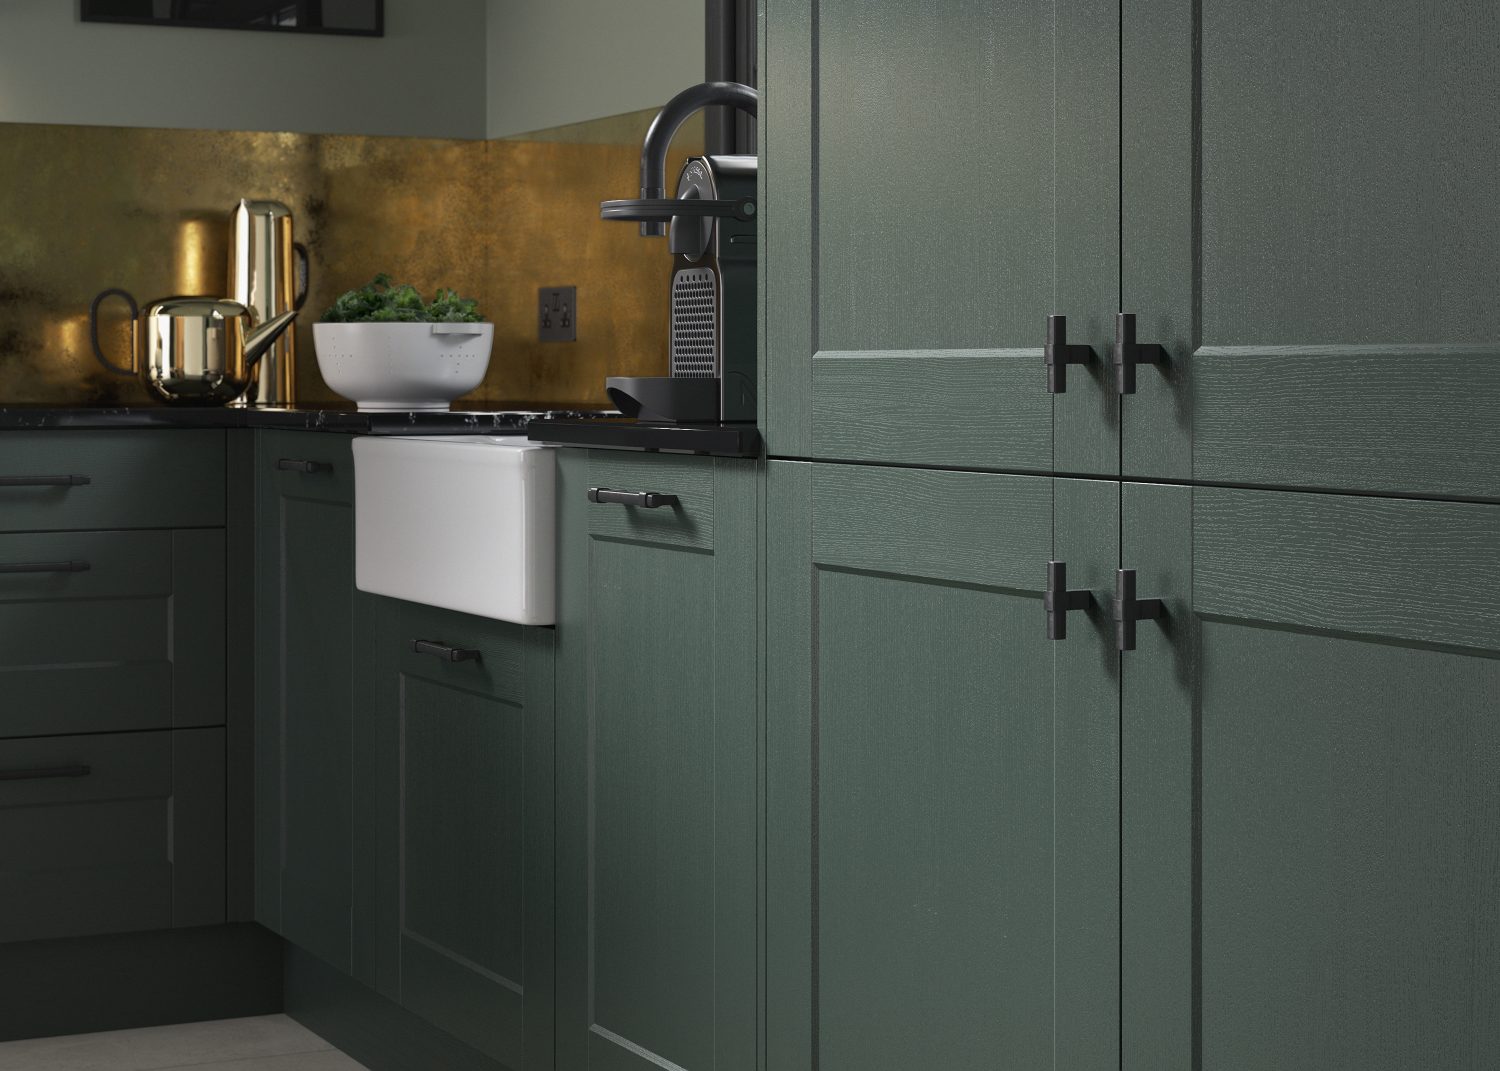 Kendal shaker Heritage Green kitchen made by The Kitchen Depot showcasing cabinets and belfast sink